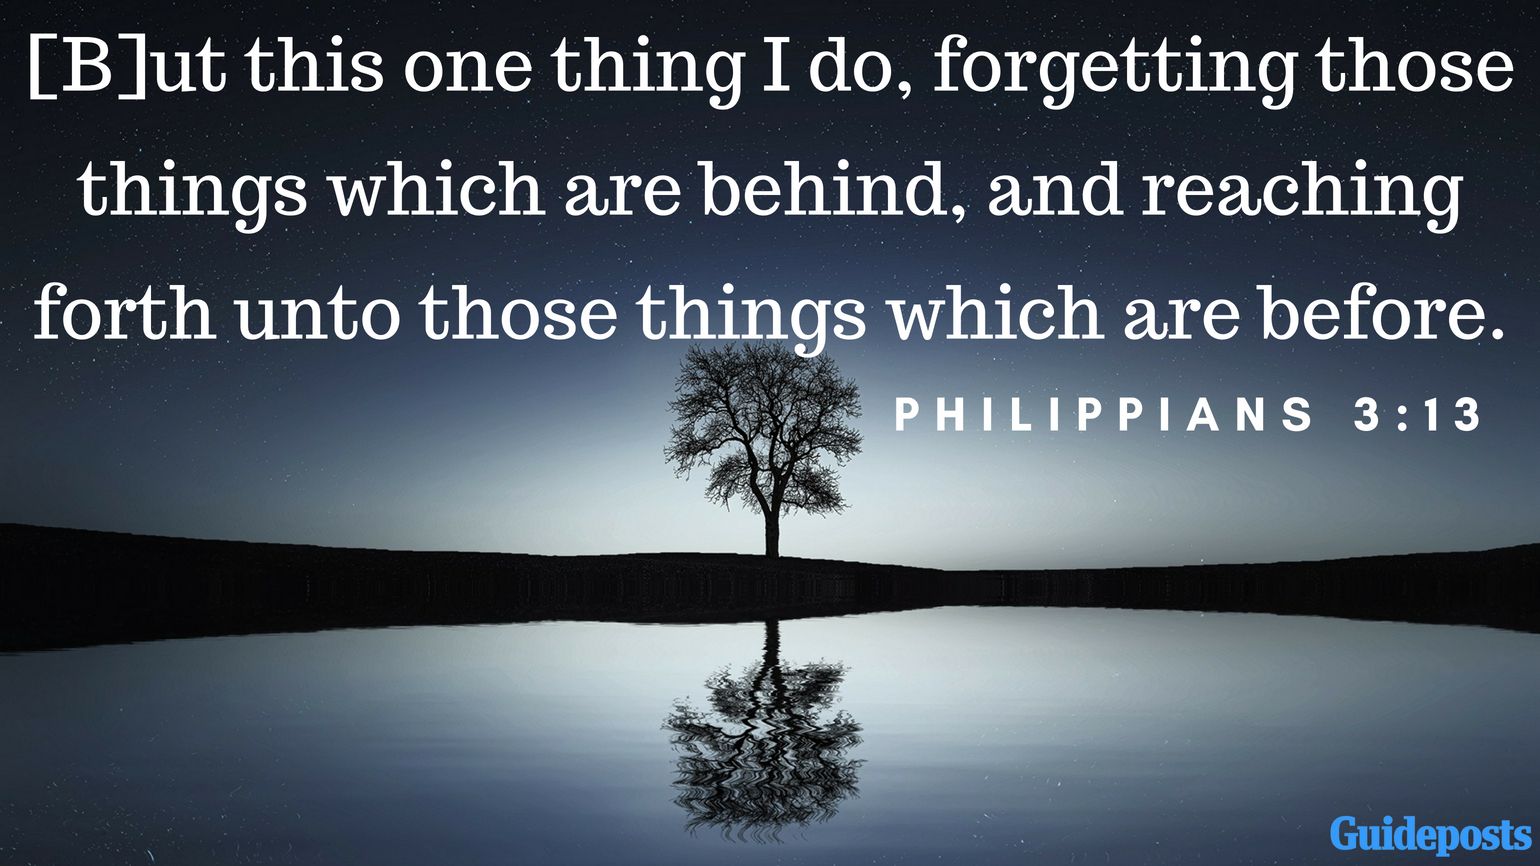 Bible Verses to Help You Forgive Yourself: [B]ut this one thing I do, forgetting those things which are behind, and reaching forth unto those things which are before. Philippians 3:13 better living life advice